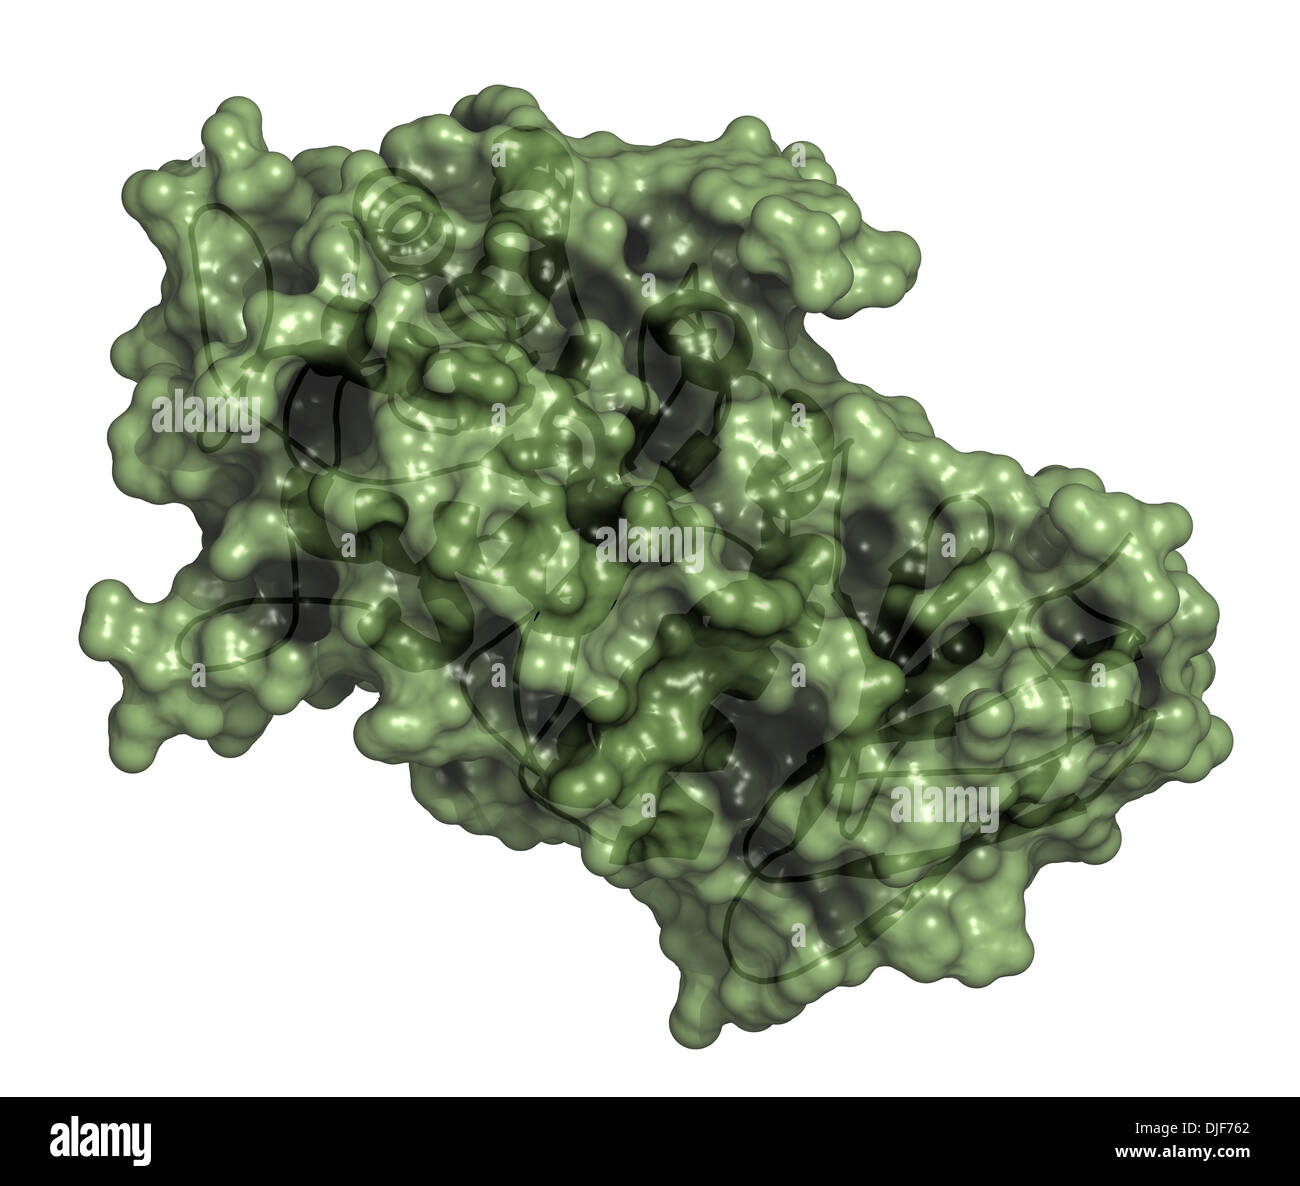 Alpha-galactosidase (Agalsidase) enzyme. Cause of Fabry's disease. Administered as enzyme replacement therapy. Stock Photo